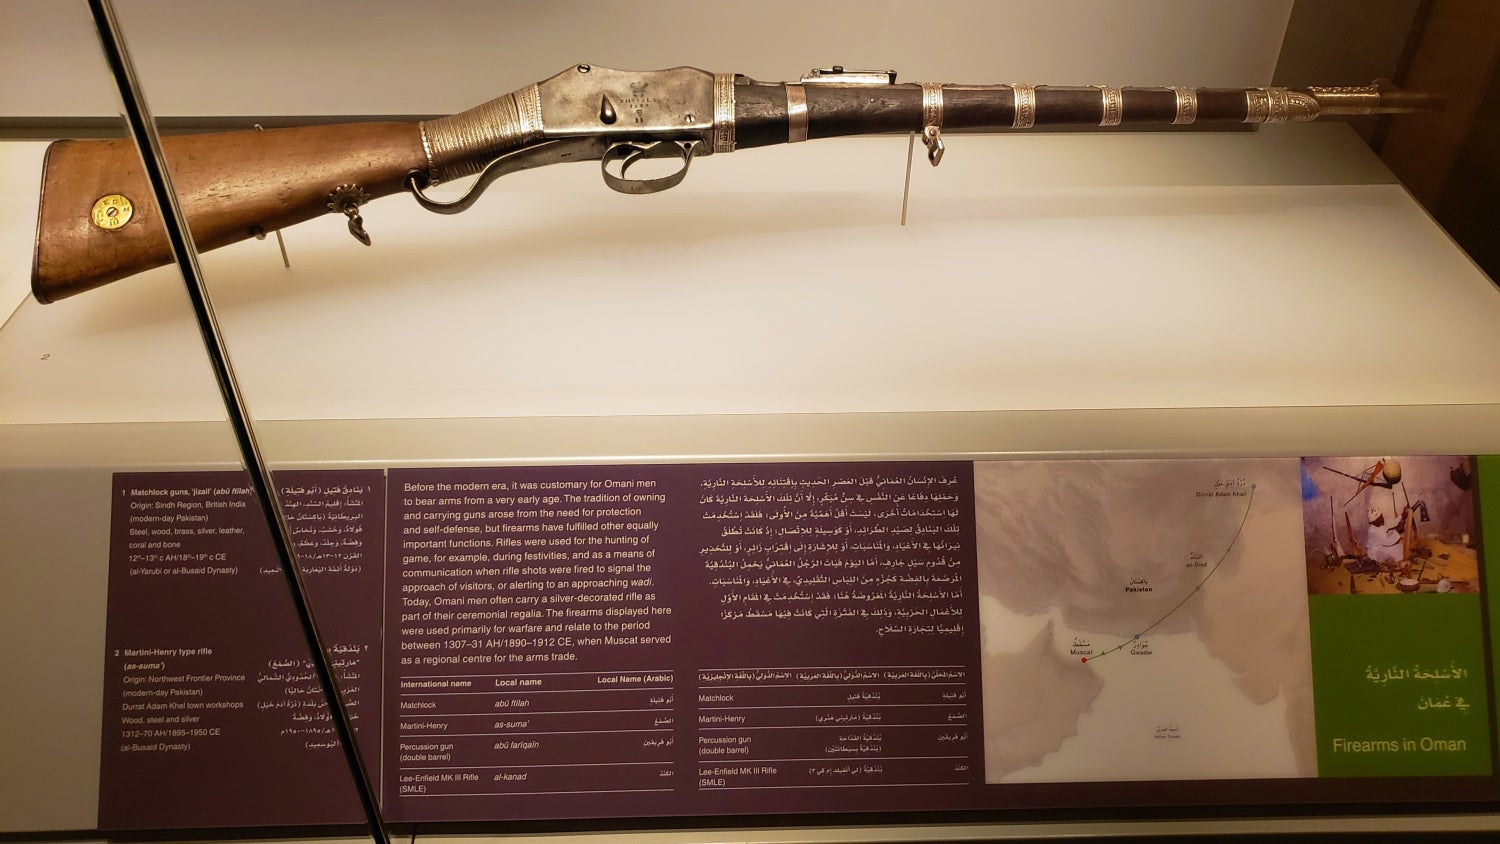 Martini-Henry carbine from the National History Museum of Oman